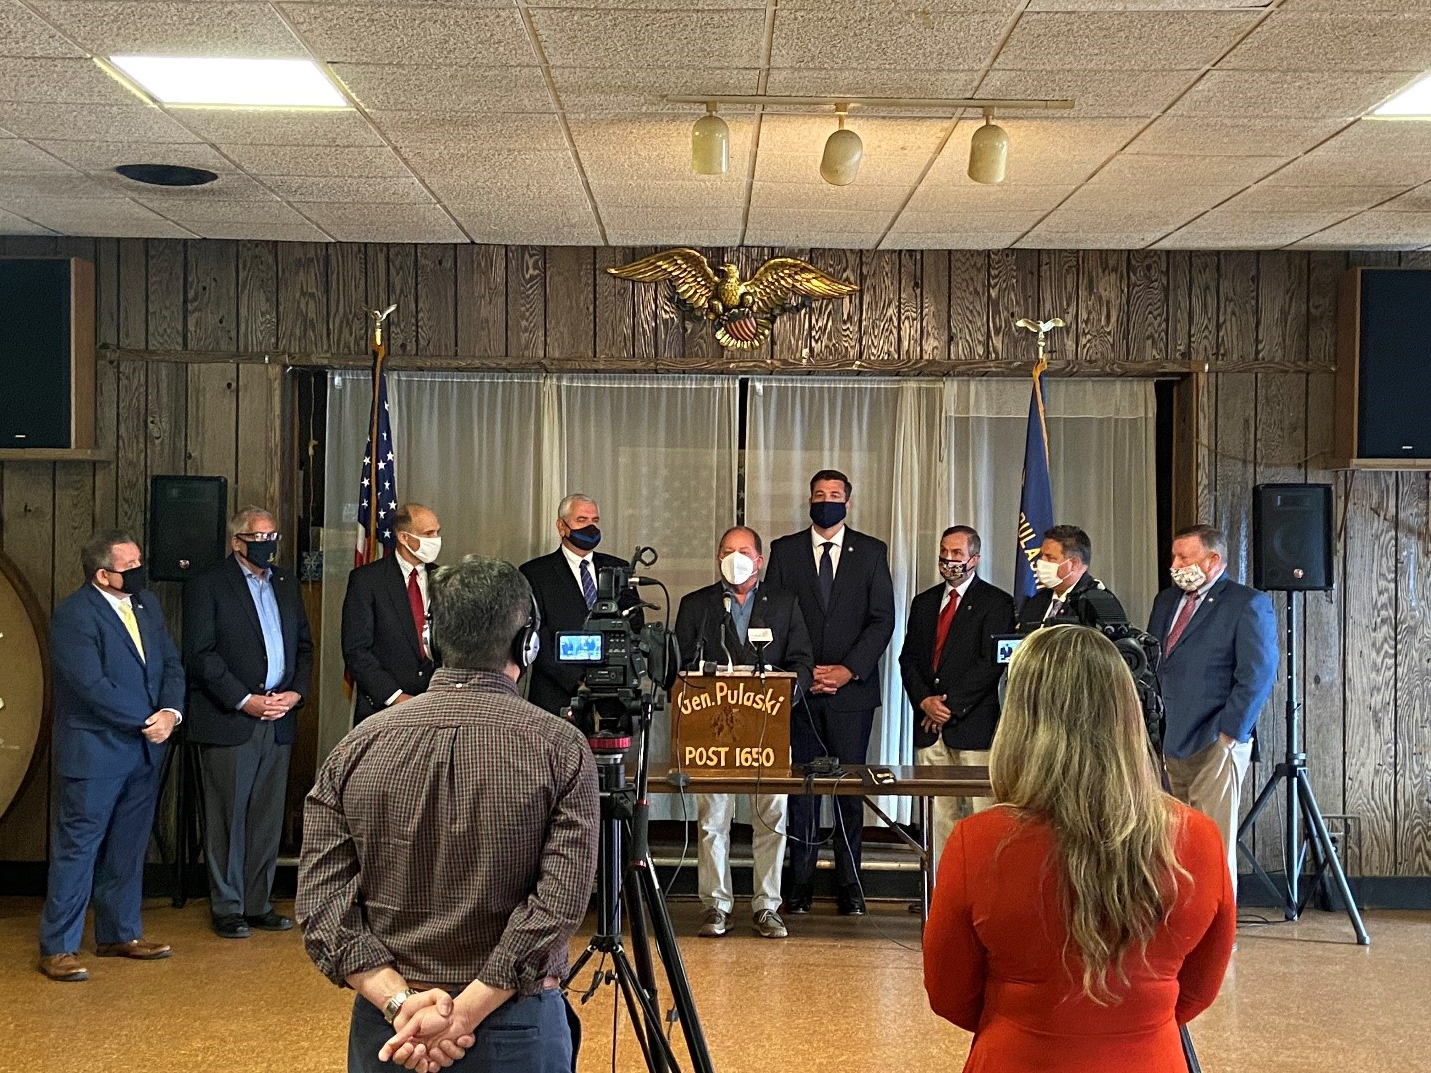 Assemblyman Steve Hawley (R,C,I-Batavia) (center) joins veterans and his Assembly Minority Colleagues who have also served in the military to urge for a focus on passing legislation to help veterans.